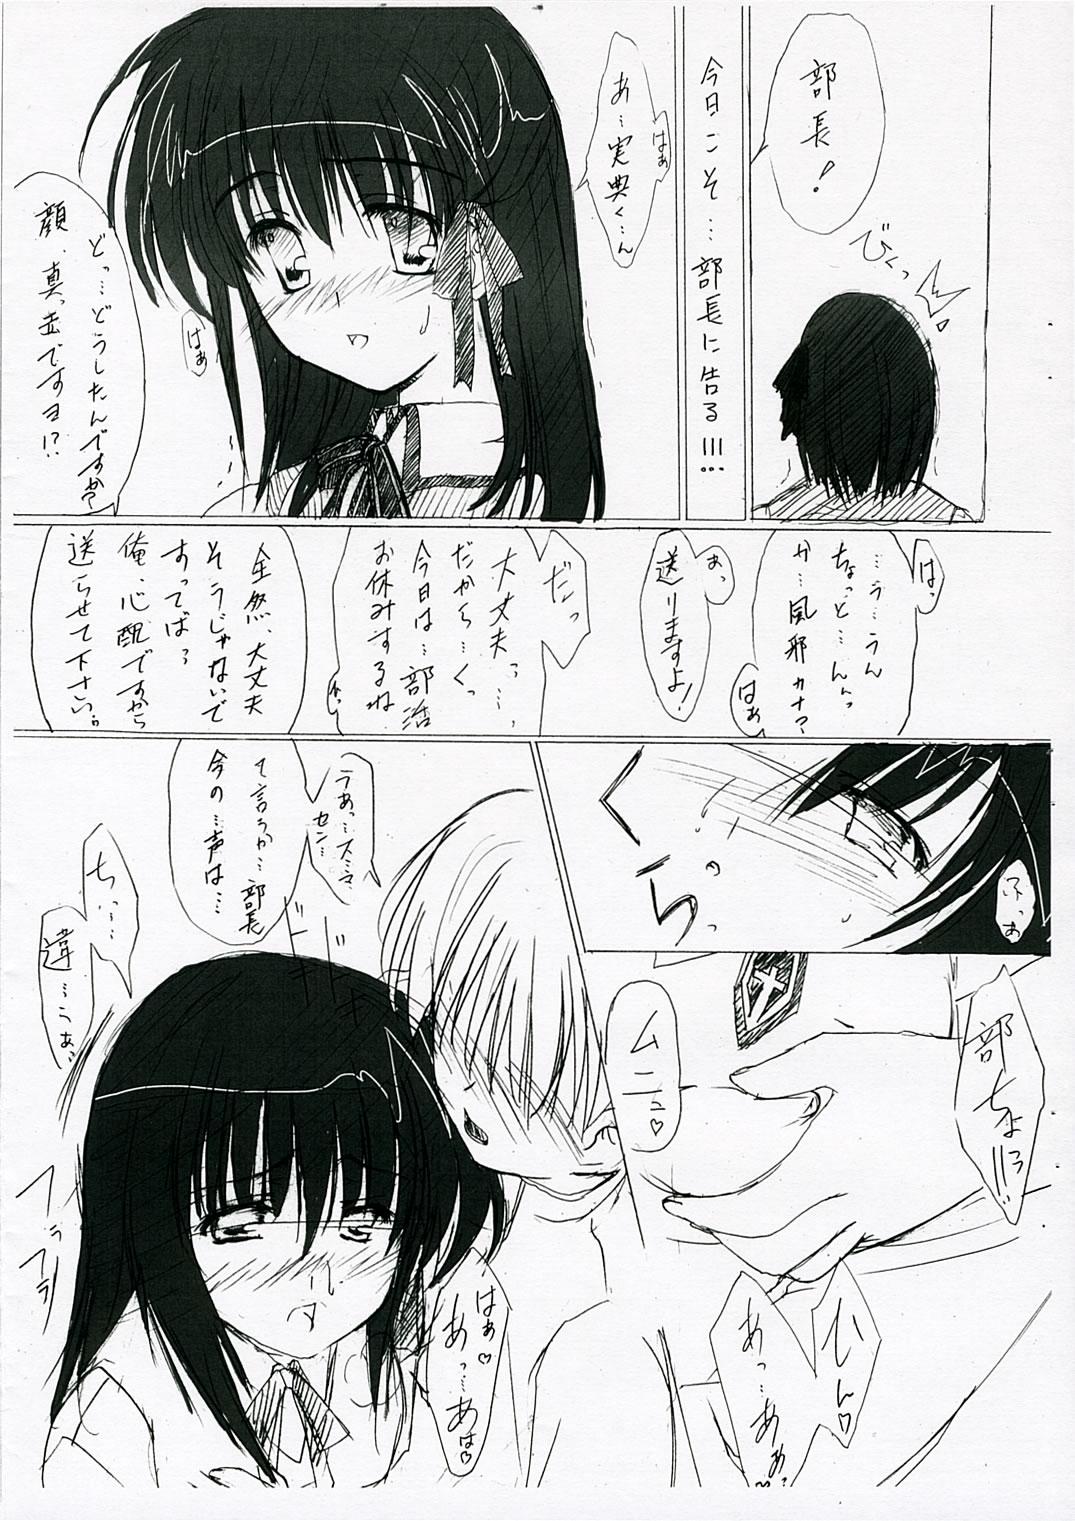 Secret Cherry Drop - Fate stay night Anal Sex - Page 2